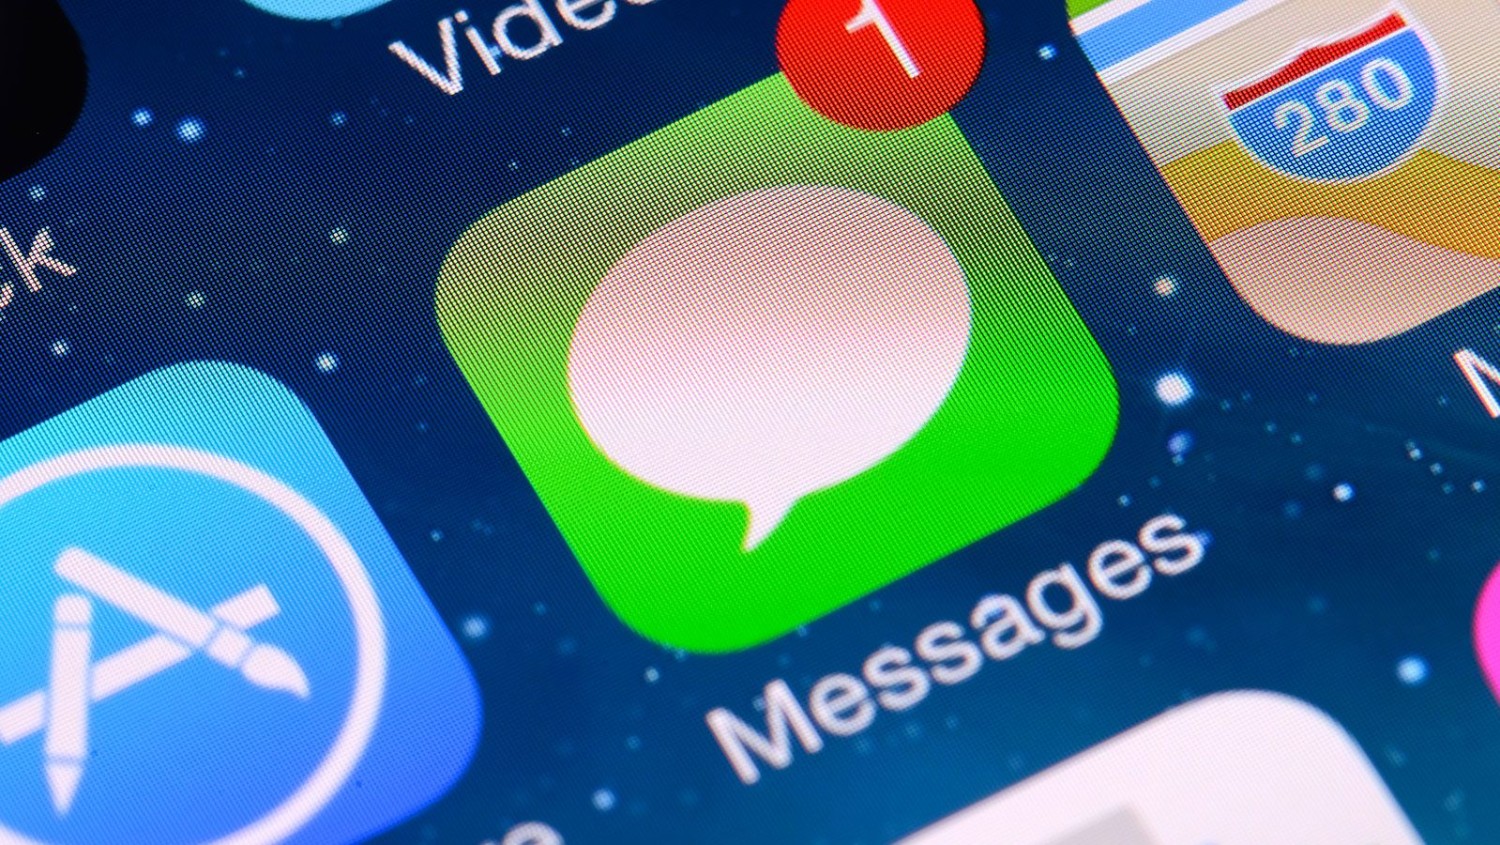 Apple will make a big change to iPhone messages next year